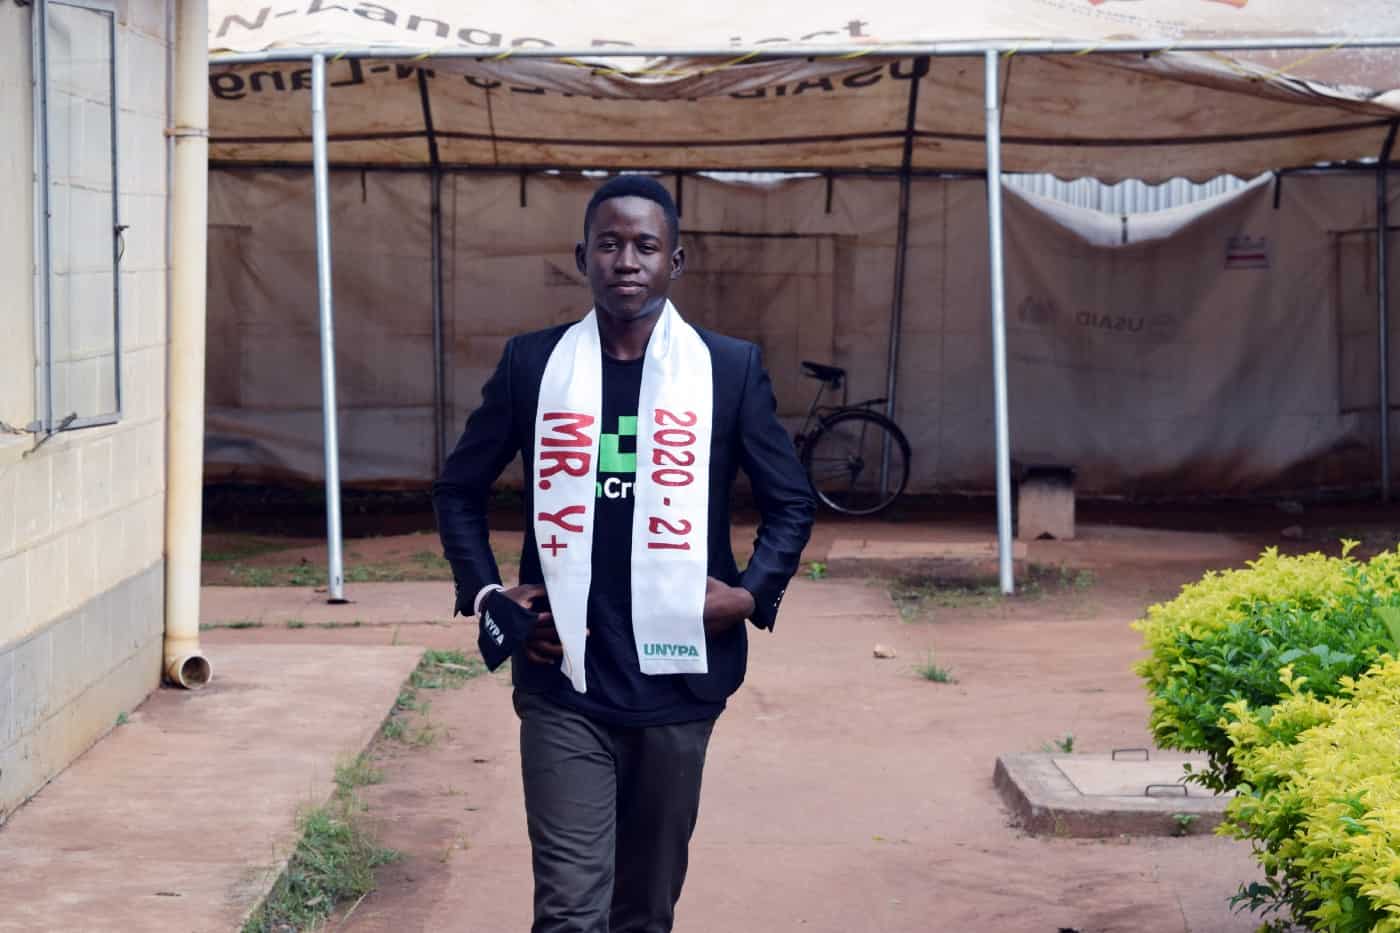 Oscar, in his winner’s sash, is ready to spread positive messages about being HIV-positive. / Angela Kateemu, USAID RHITES-North Lango Activity